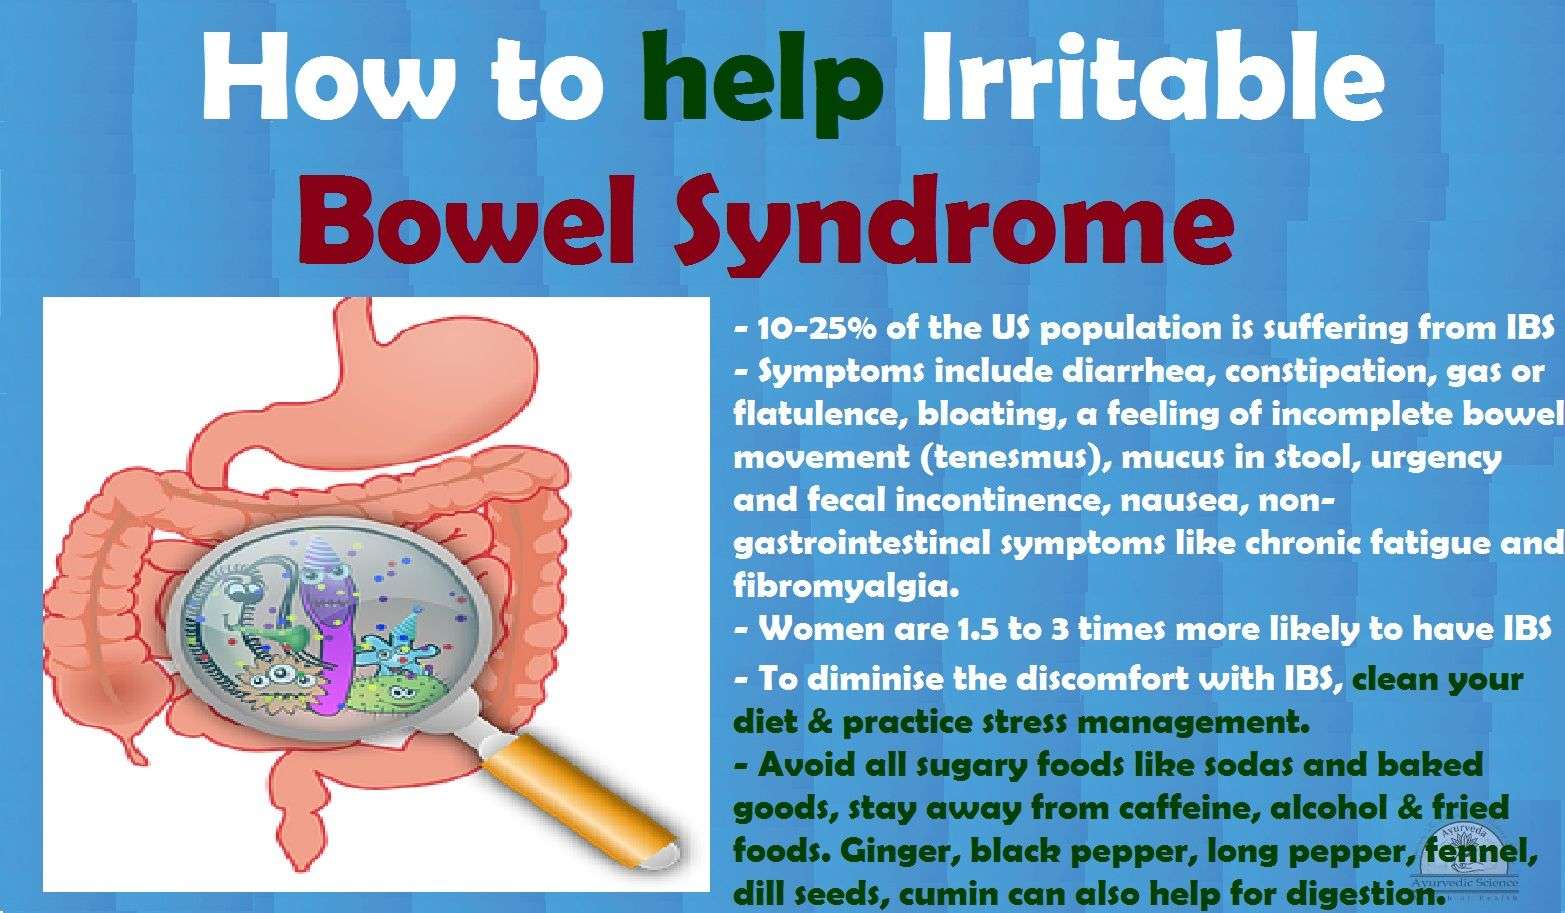 How to help Irritable Bowel Syndrome